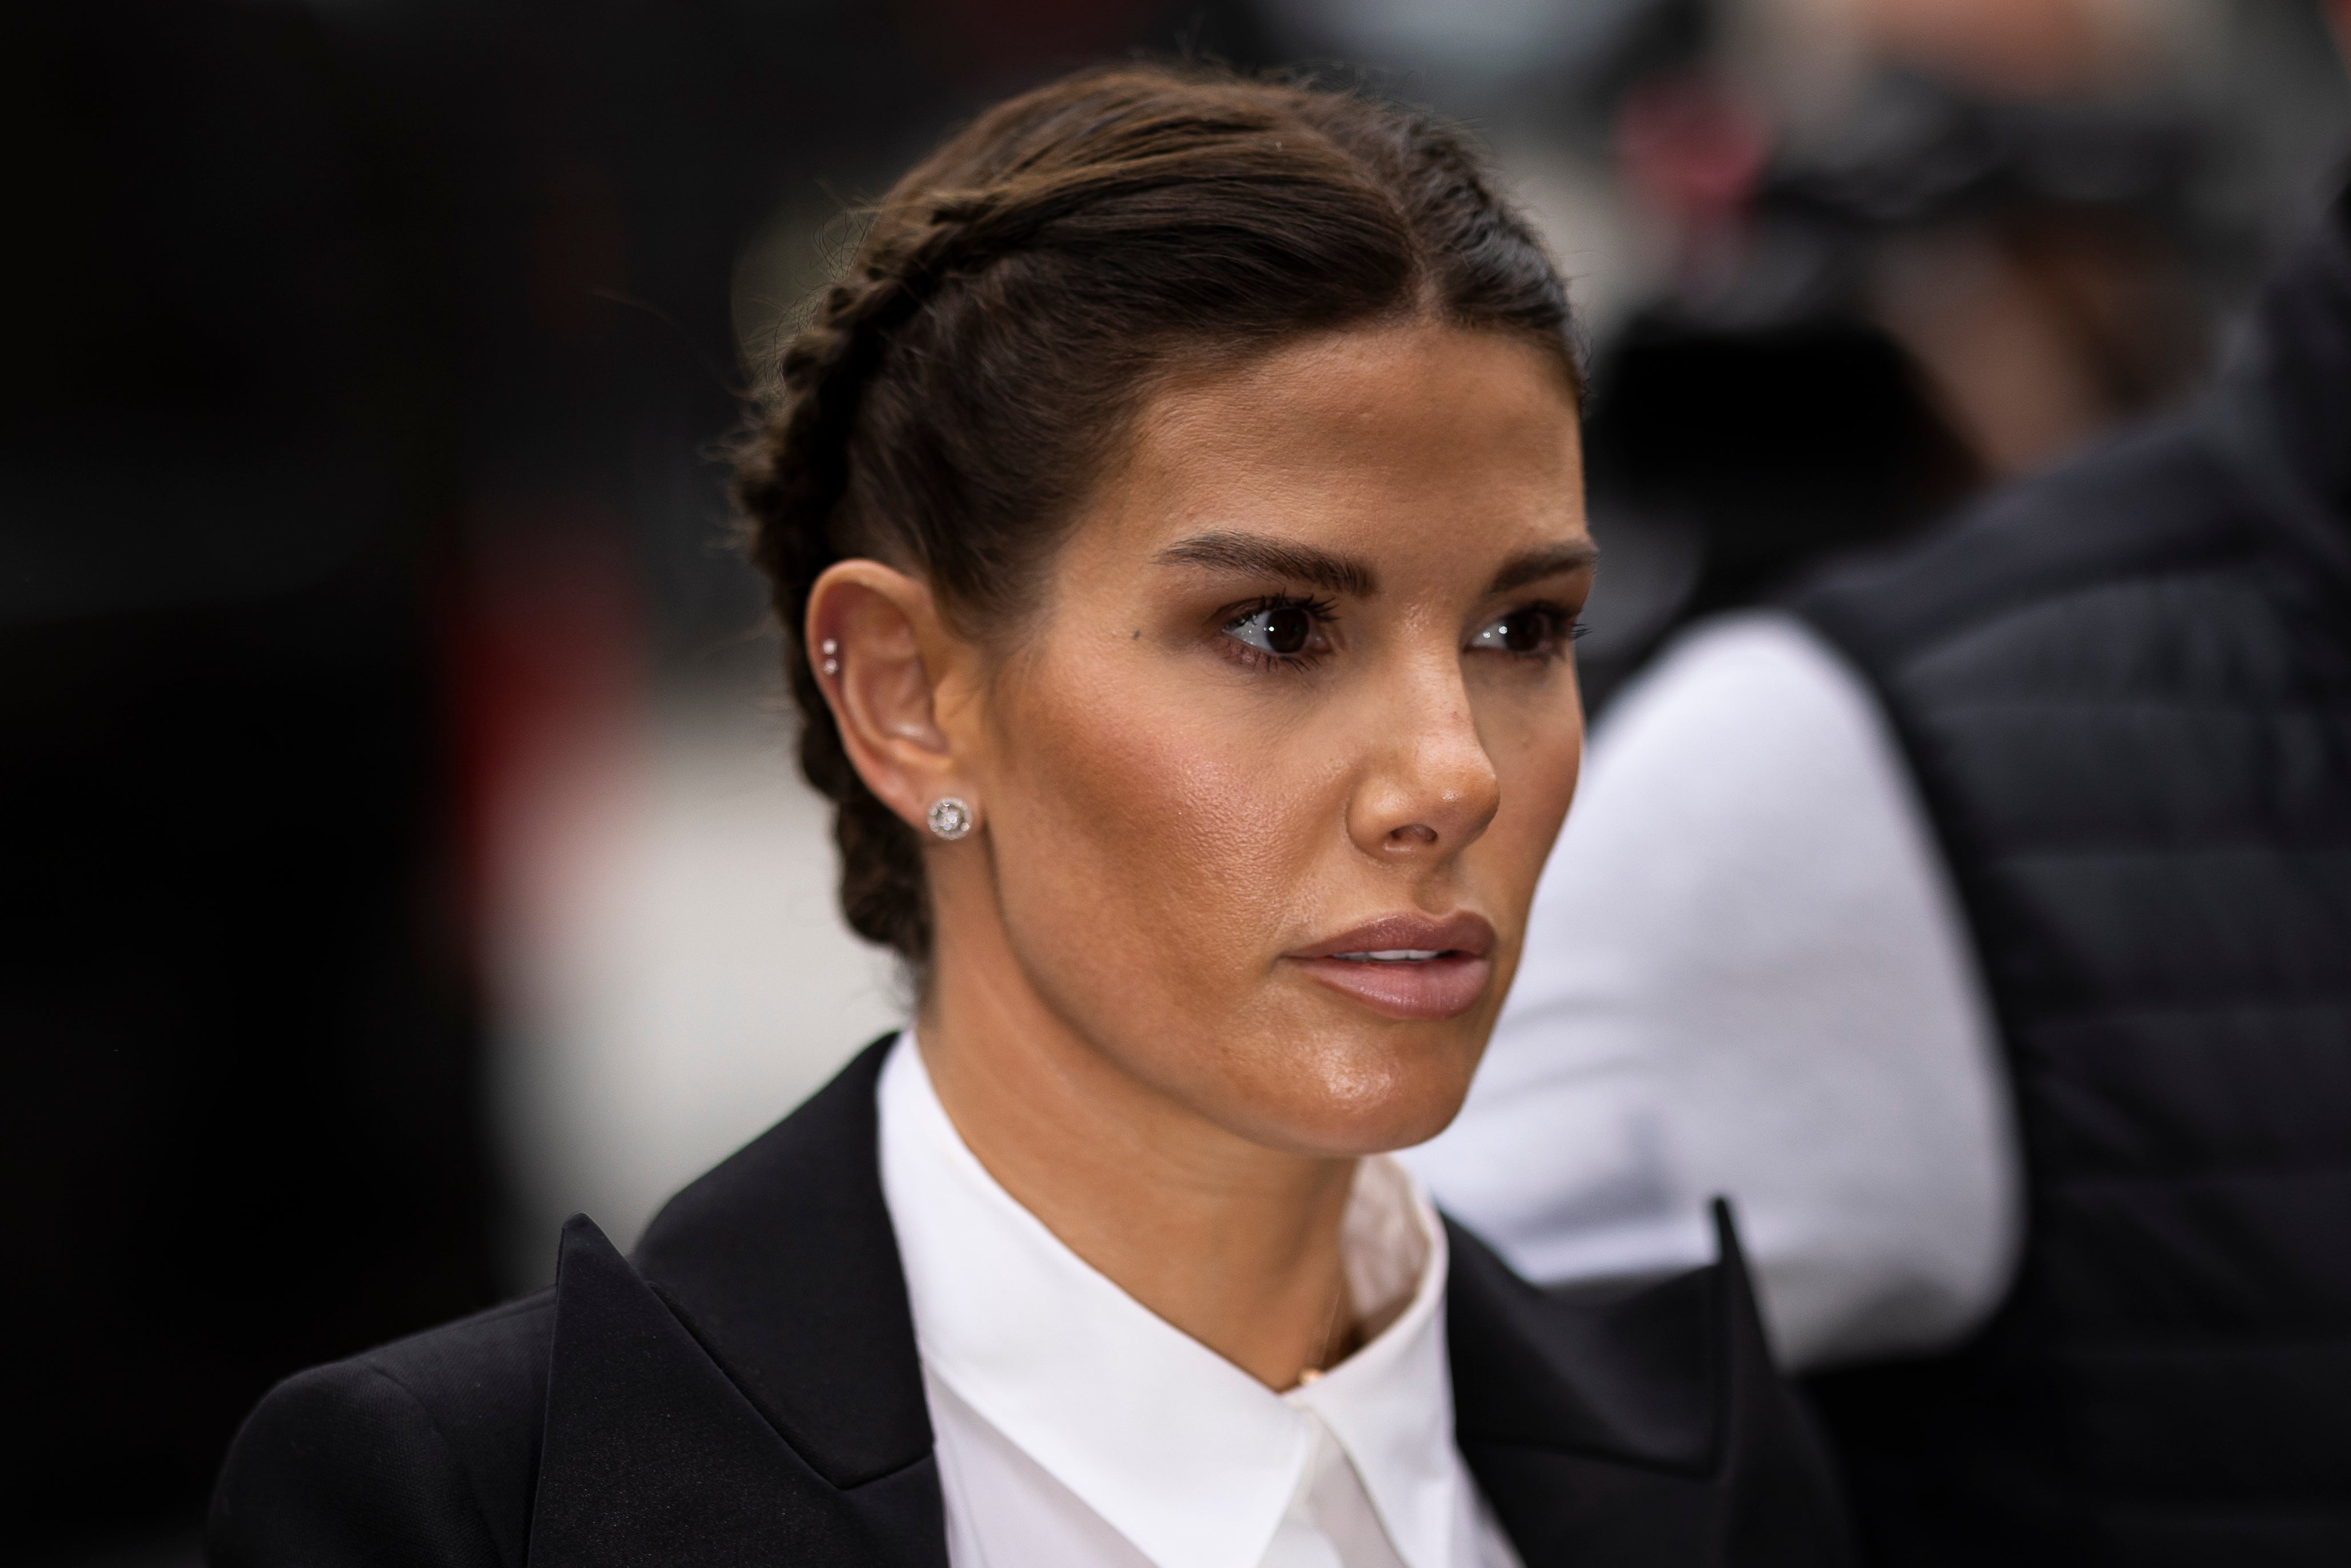 Rebekah Vardy said she is ‘extremely sad’ after the decision